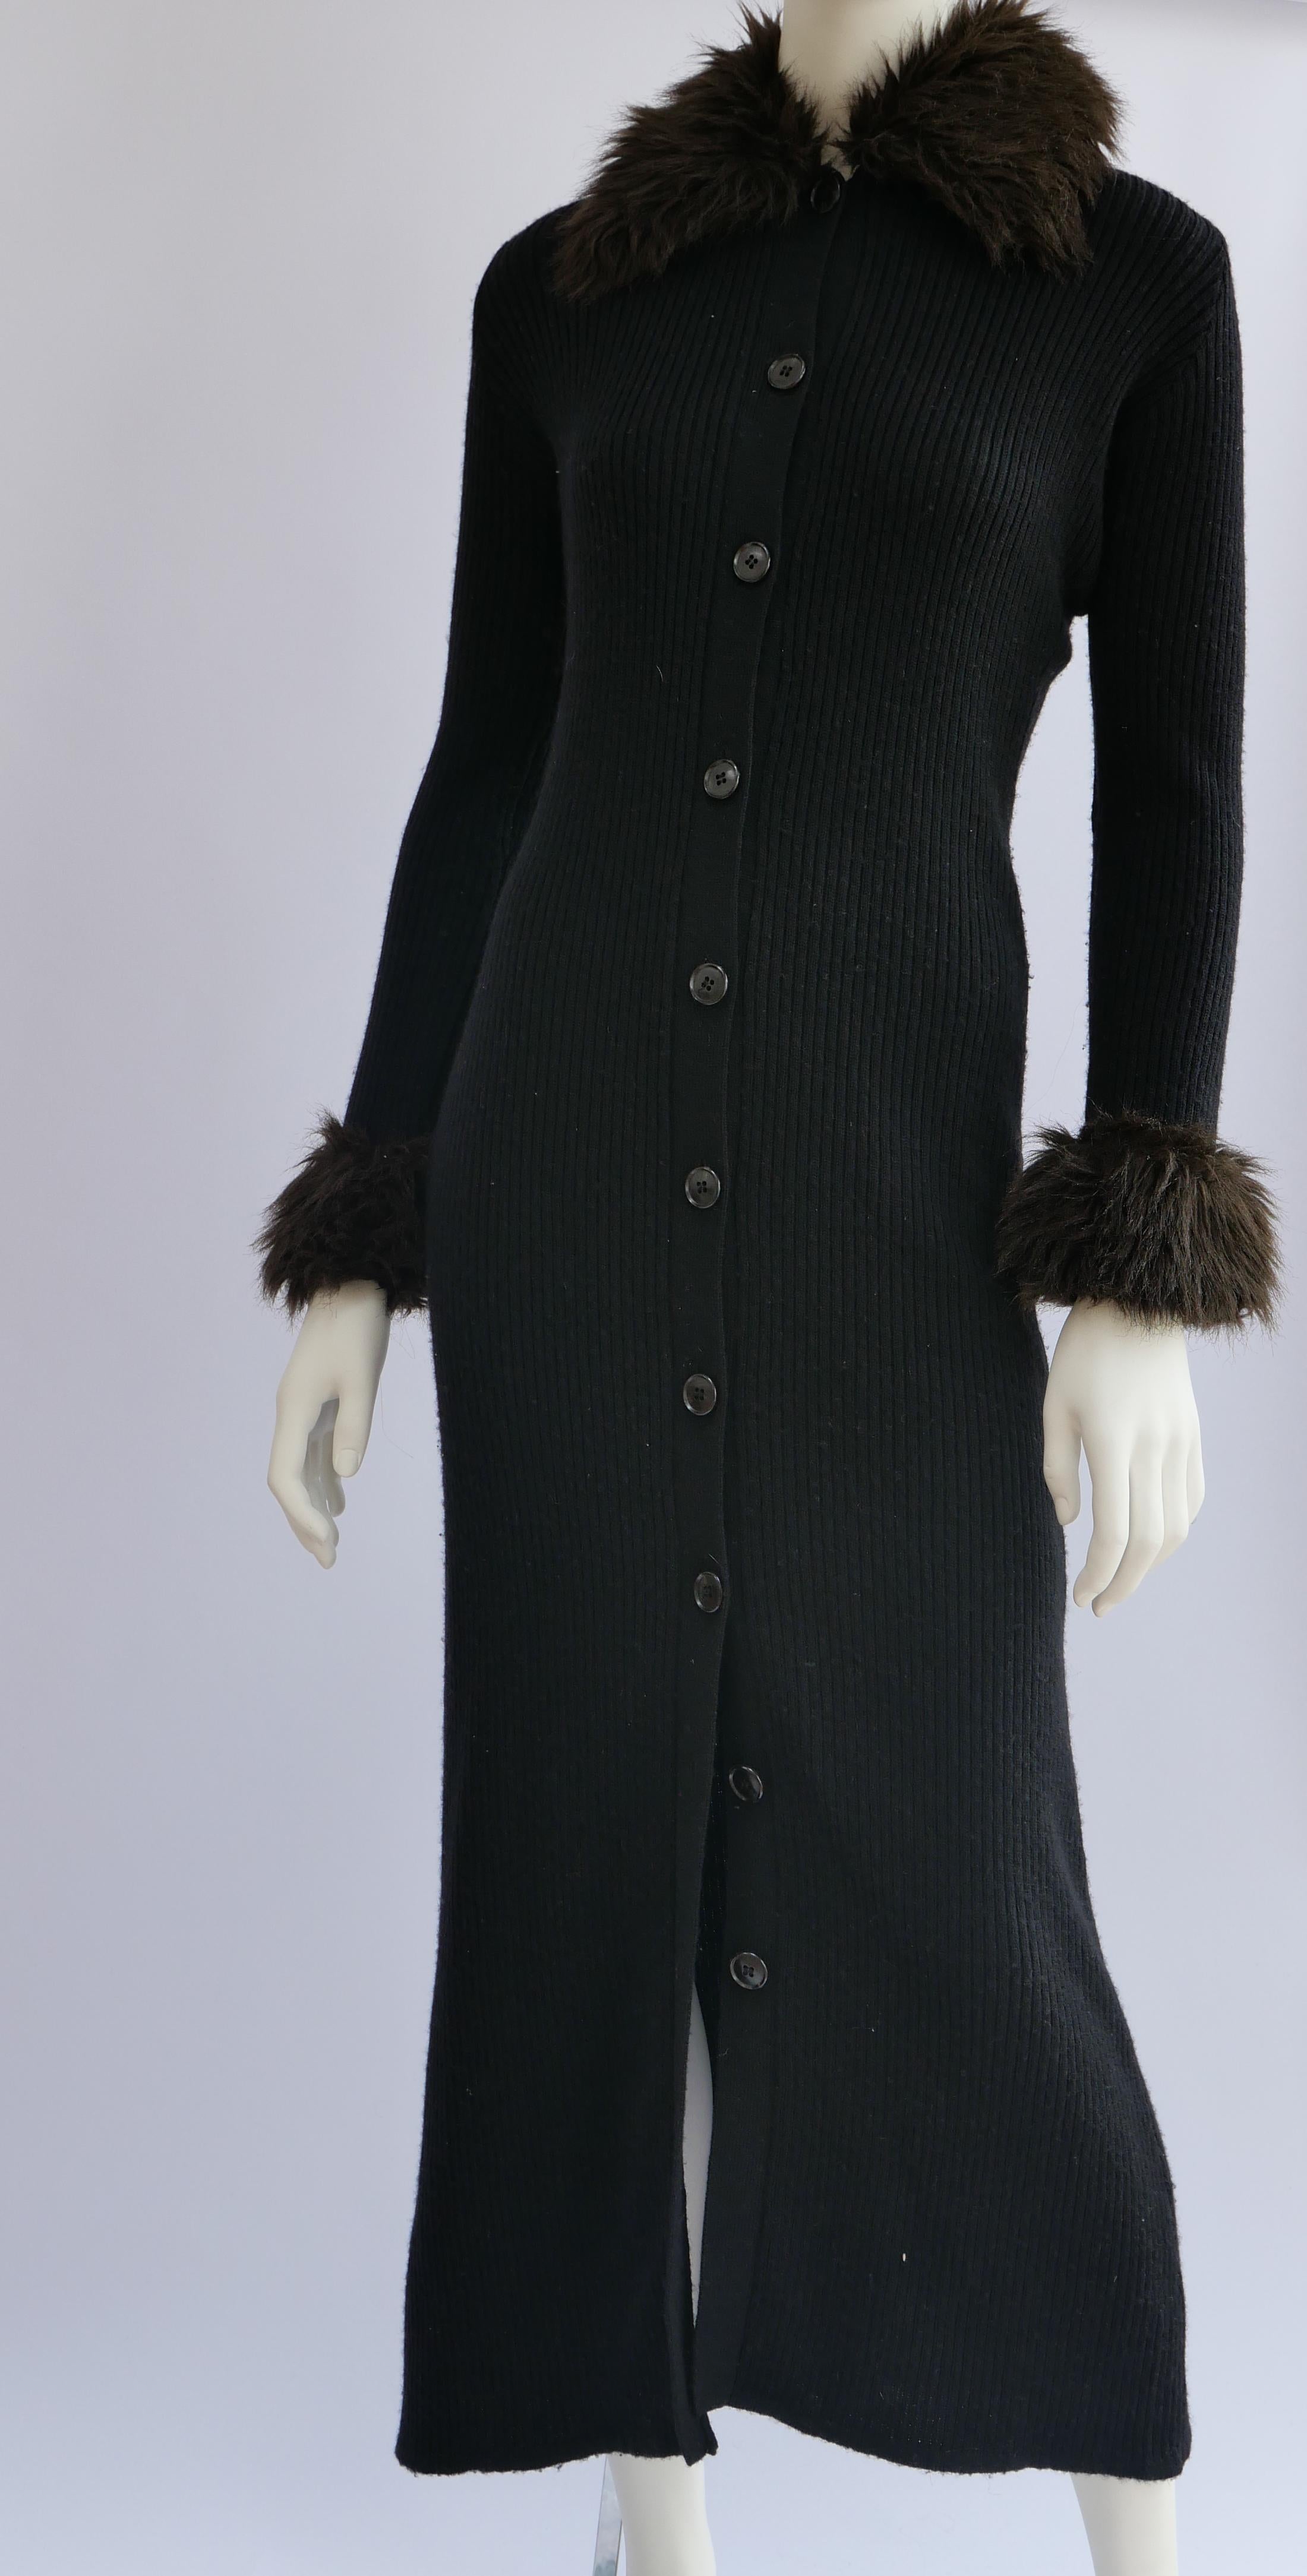 JEAN PAUL Gaultier Long Cardigan With Fur Trim Collar and Cuffs In Good Condition For Sale In London, GB